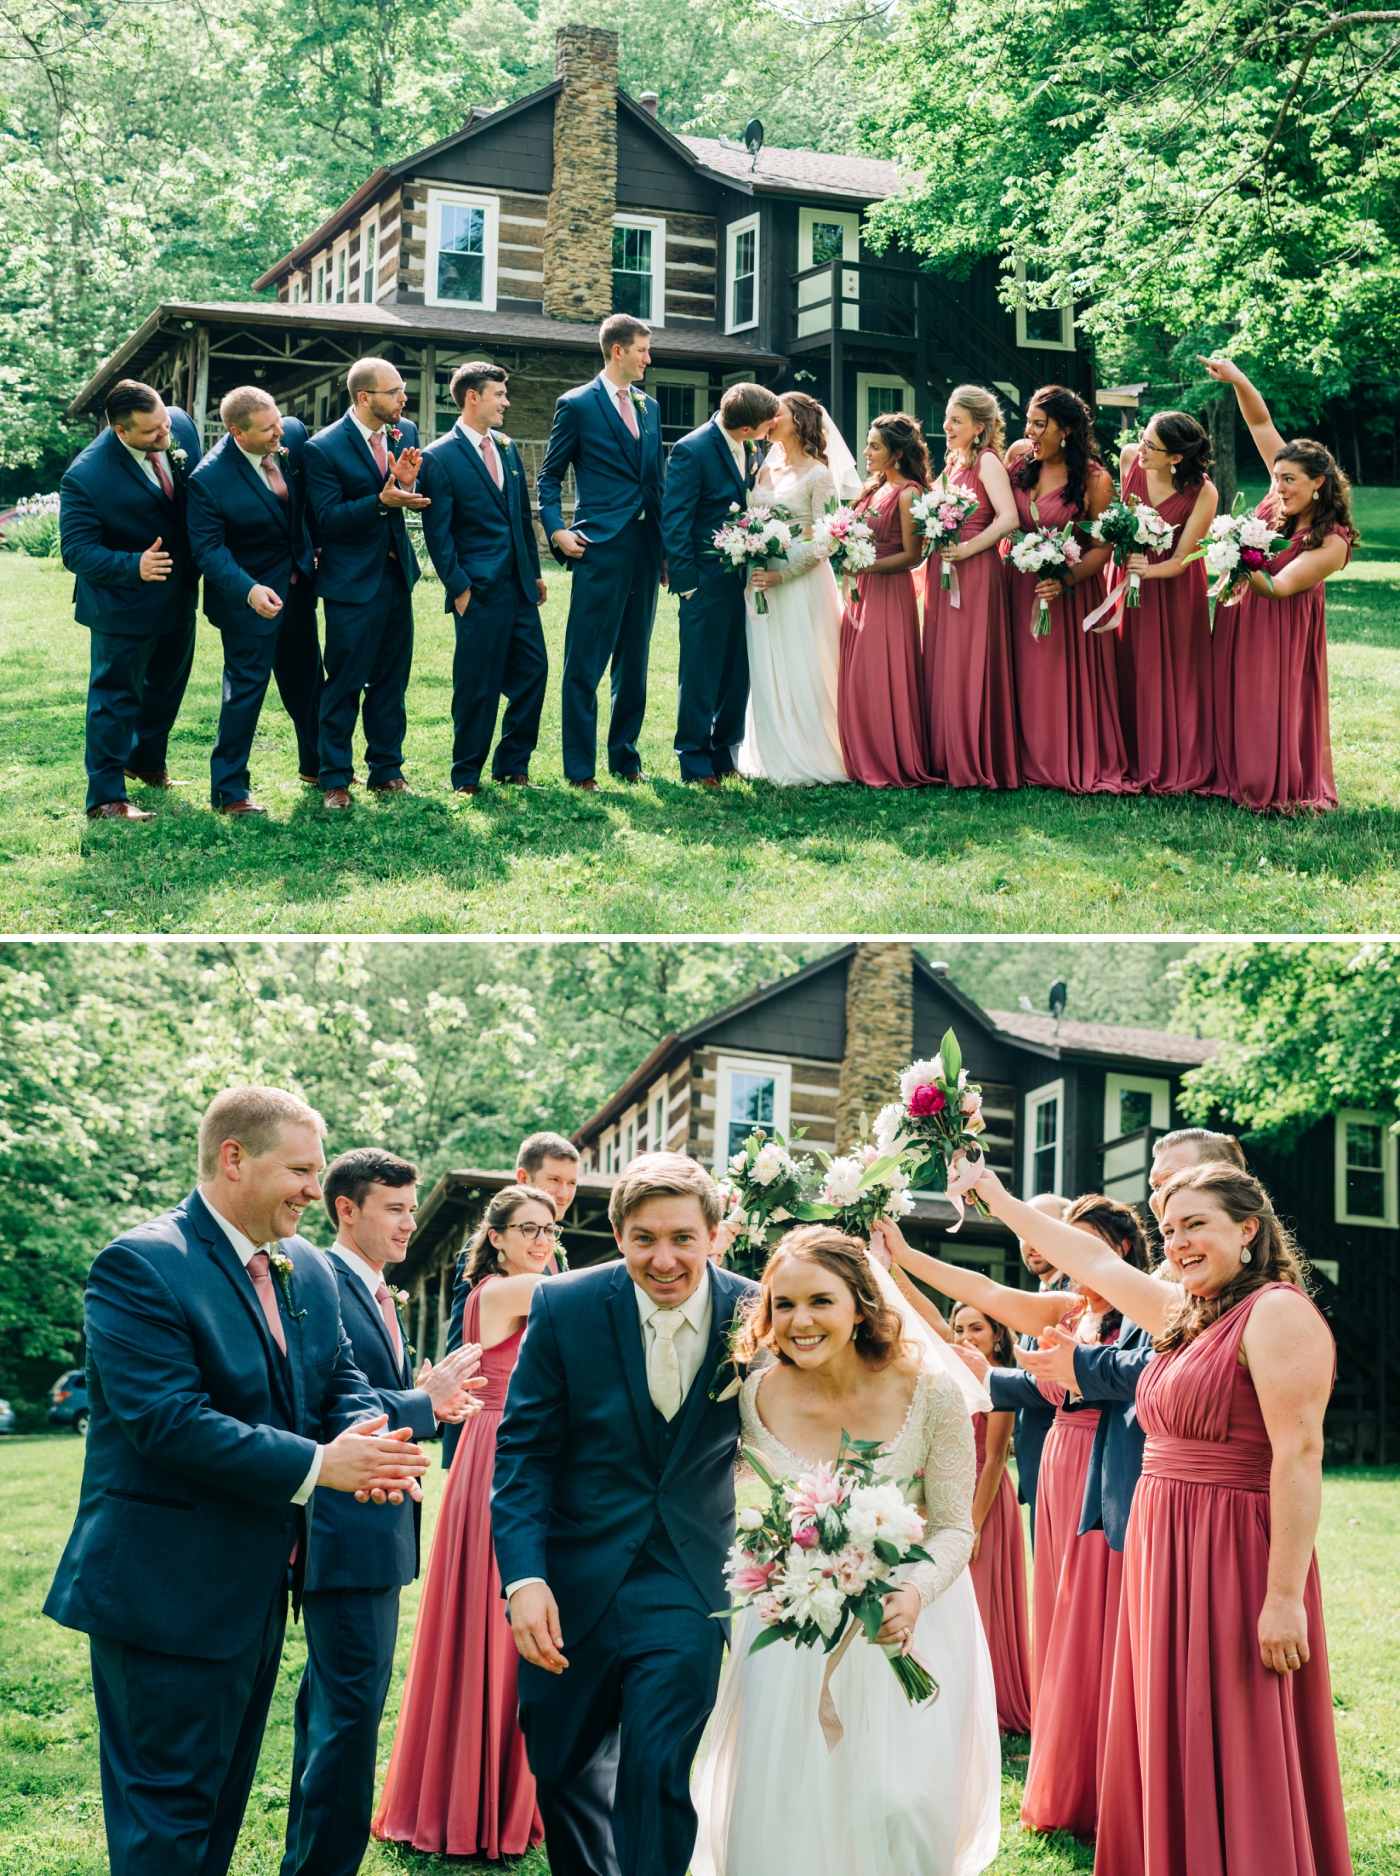 Bridal party in blue suits and dusty rose dresses